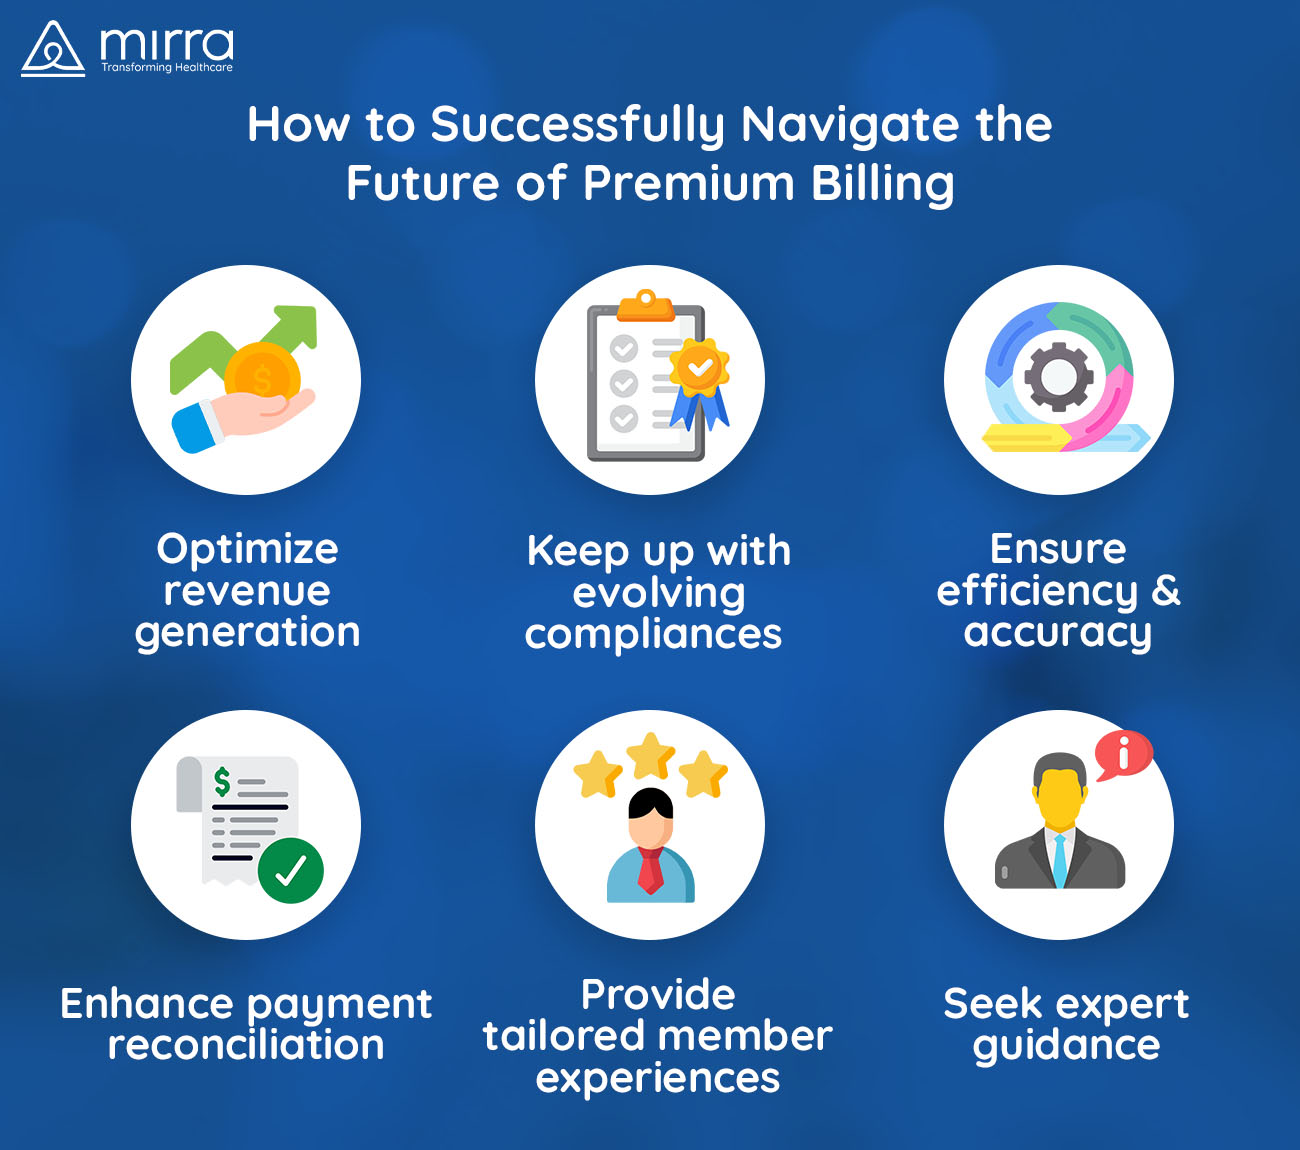 How to successfully navigate the future of premium billing